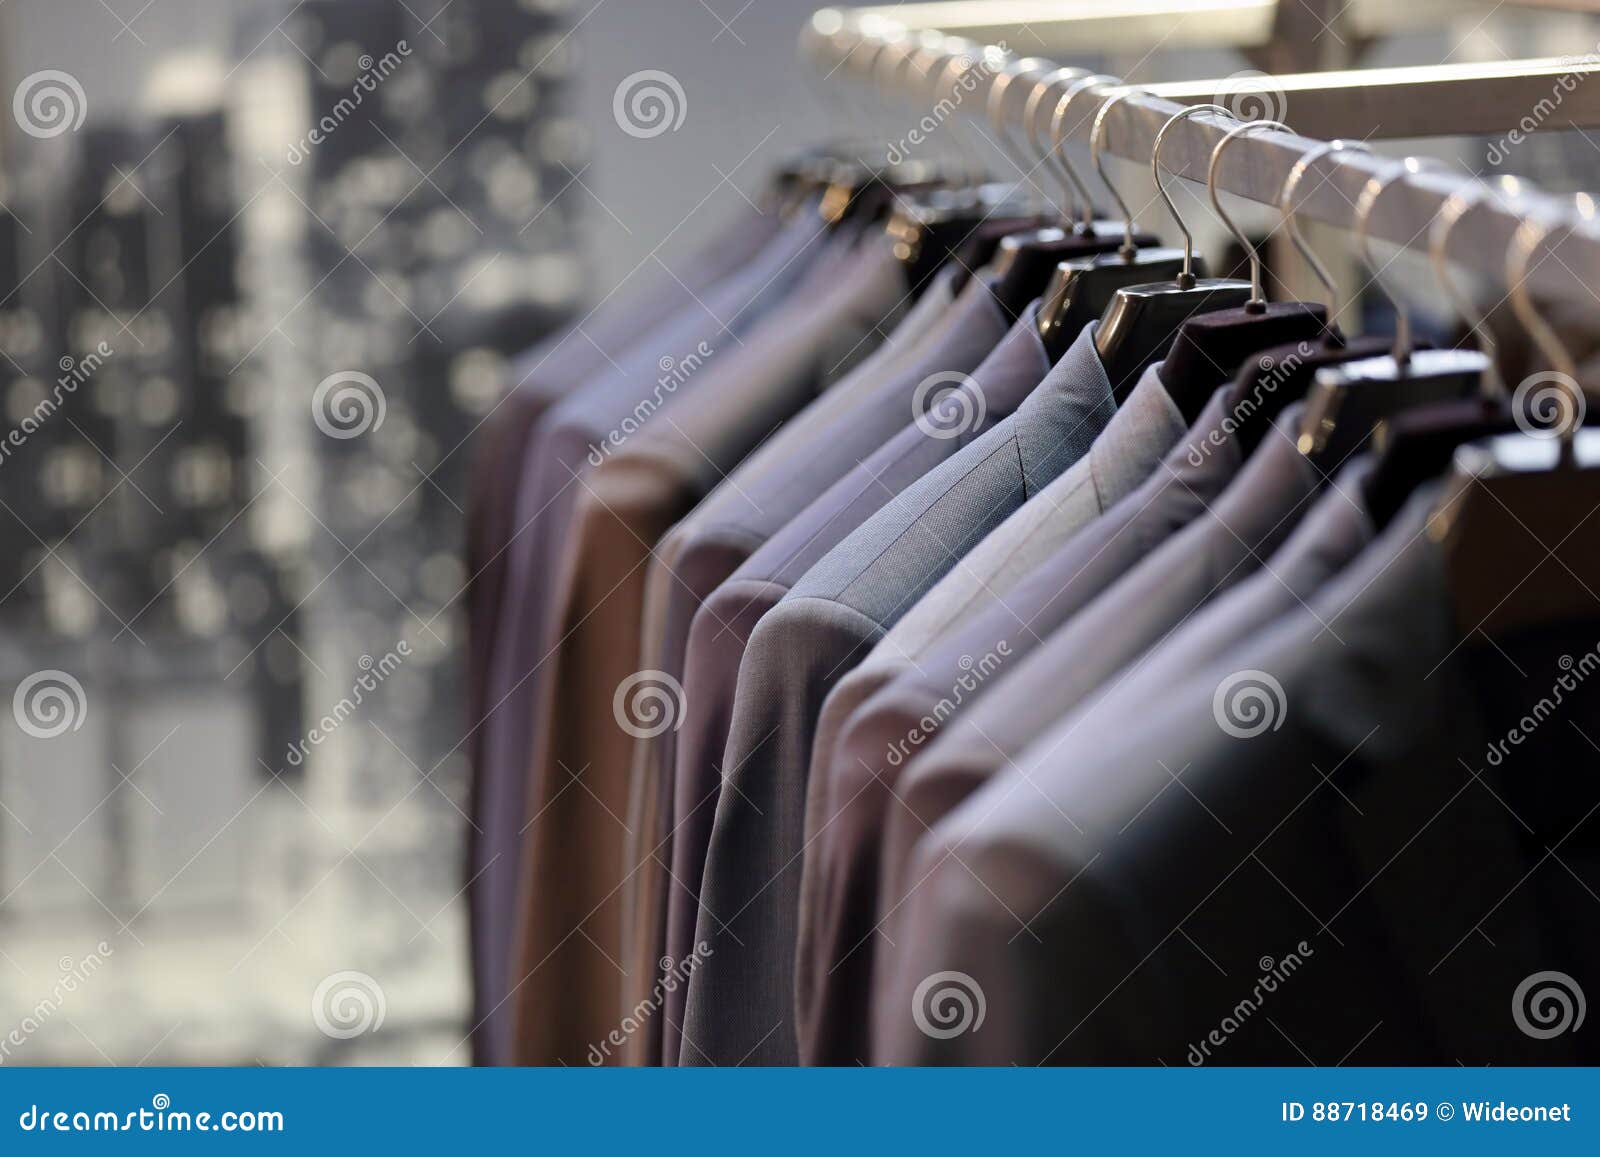 Row of Men`s Suits Hanging on Hanger Stock Image - Image of group ...